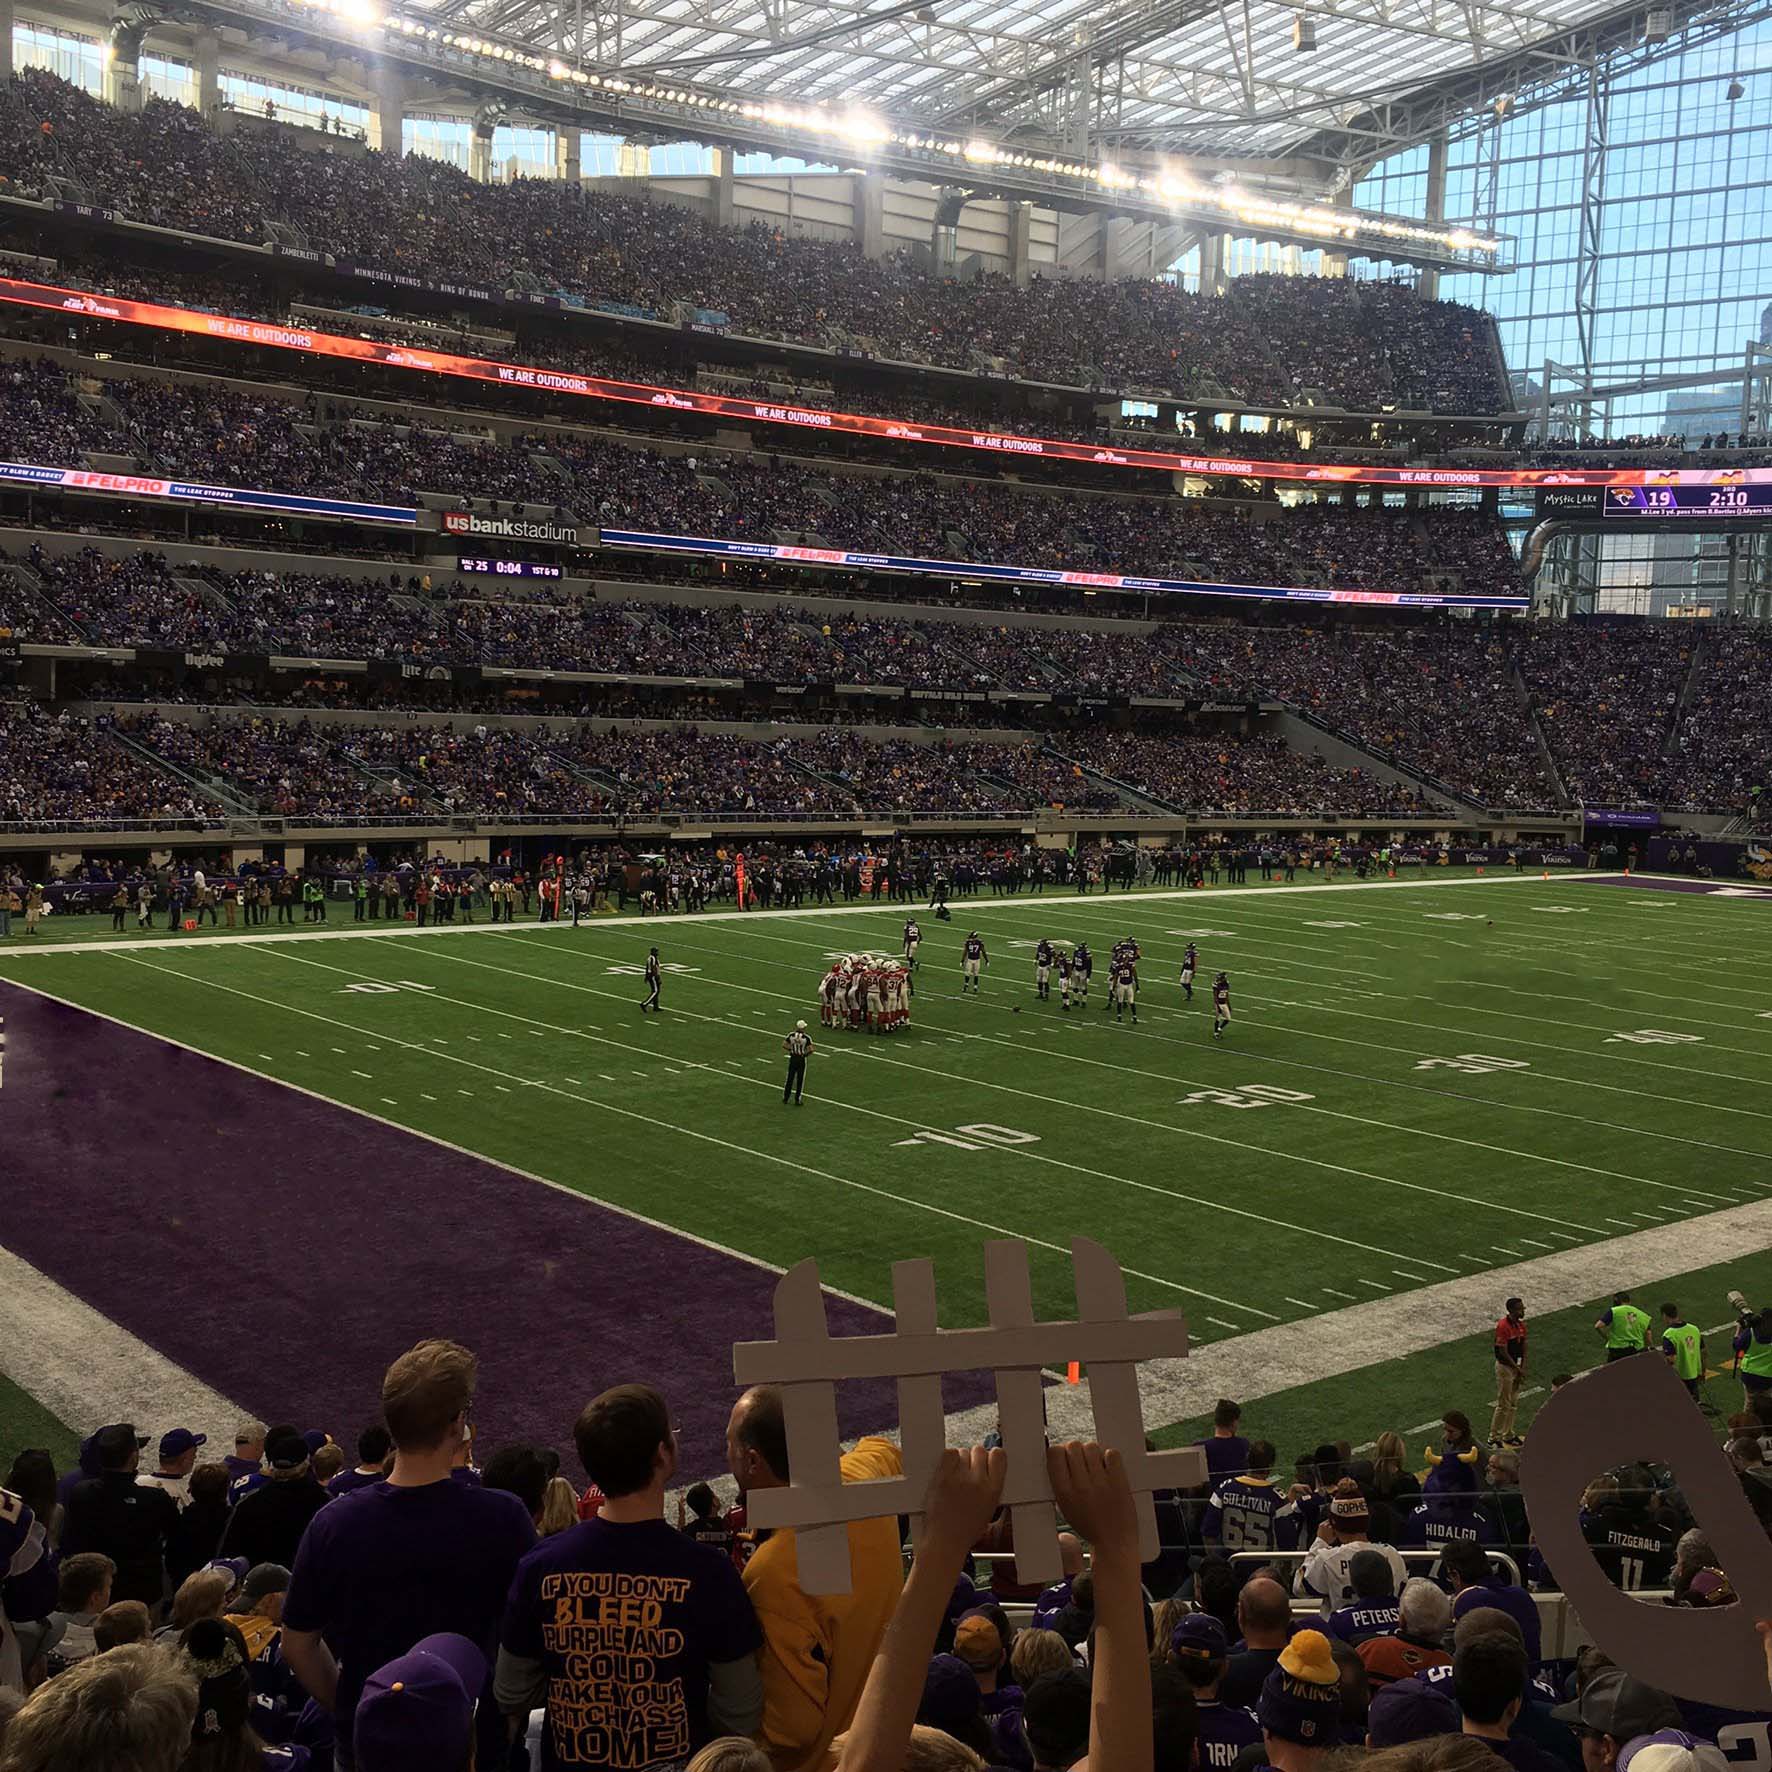 section 114, row 17 seat view  for football - u.s. bank stadium